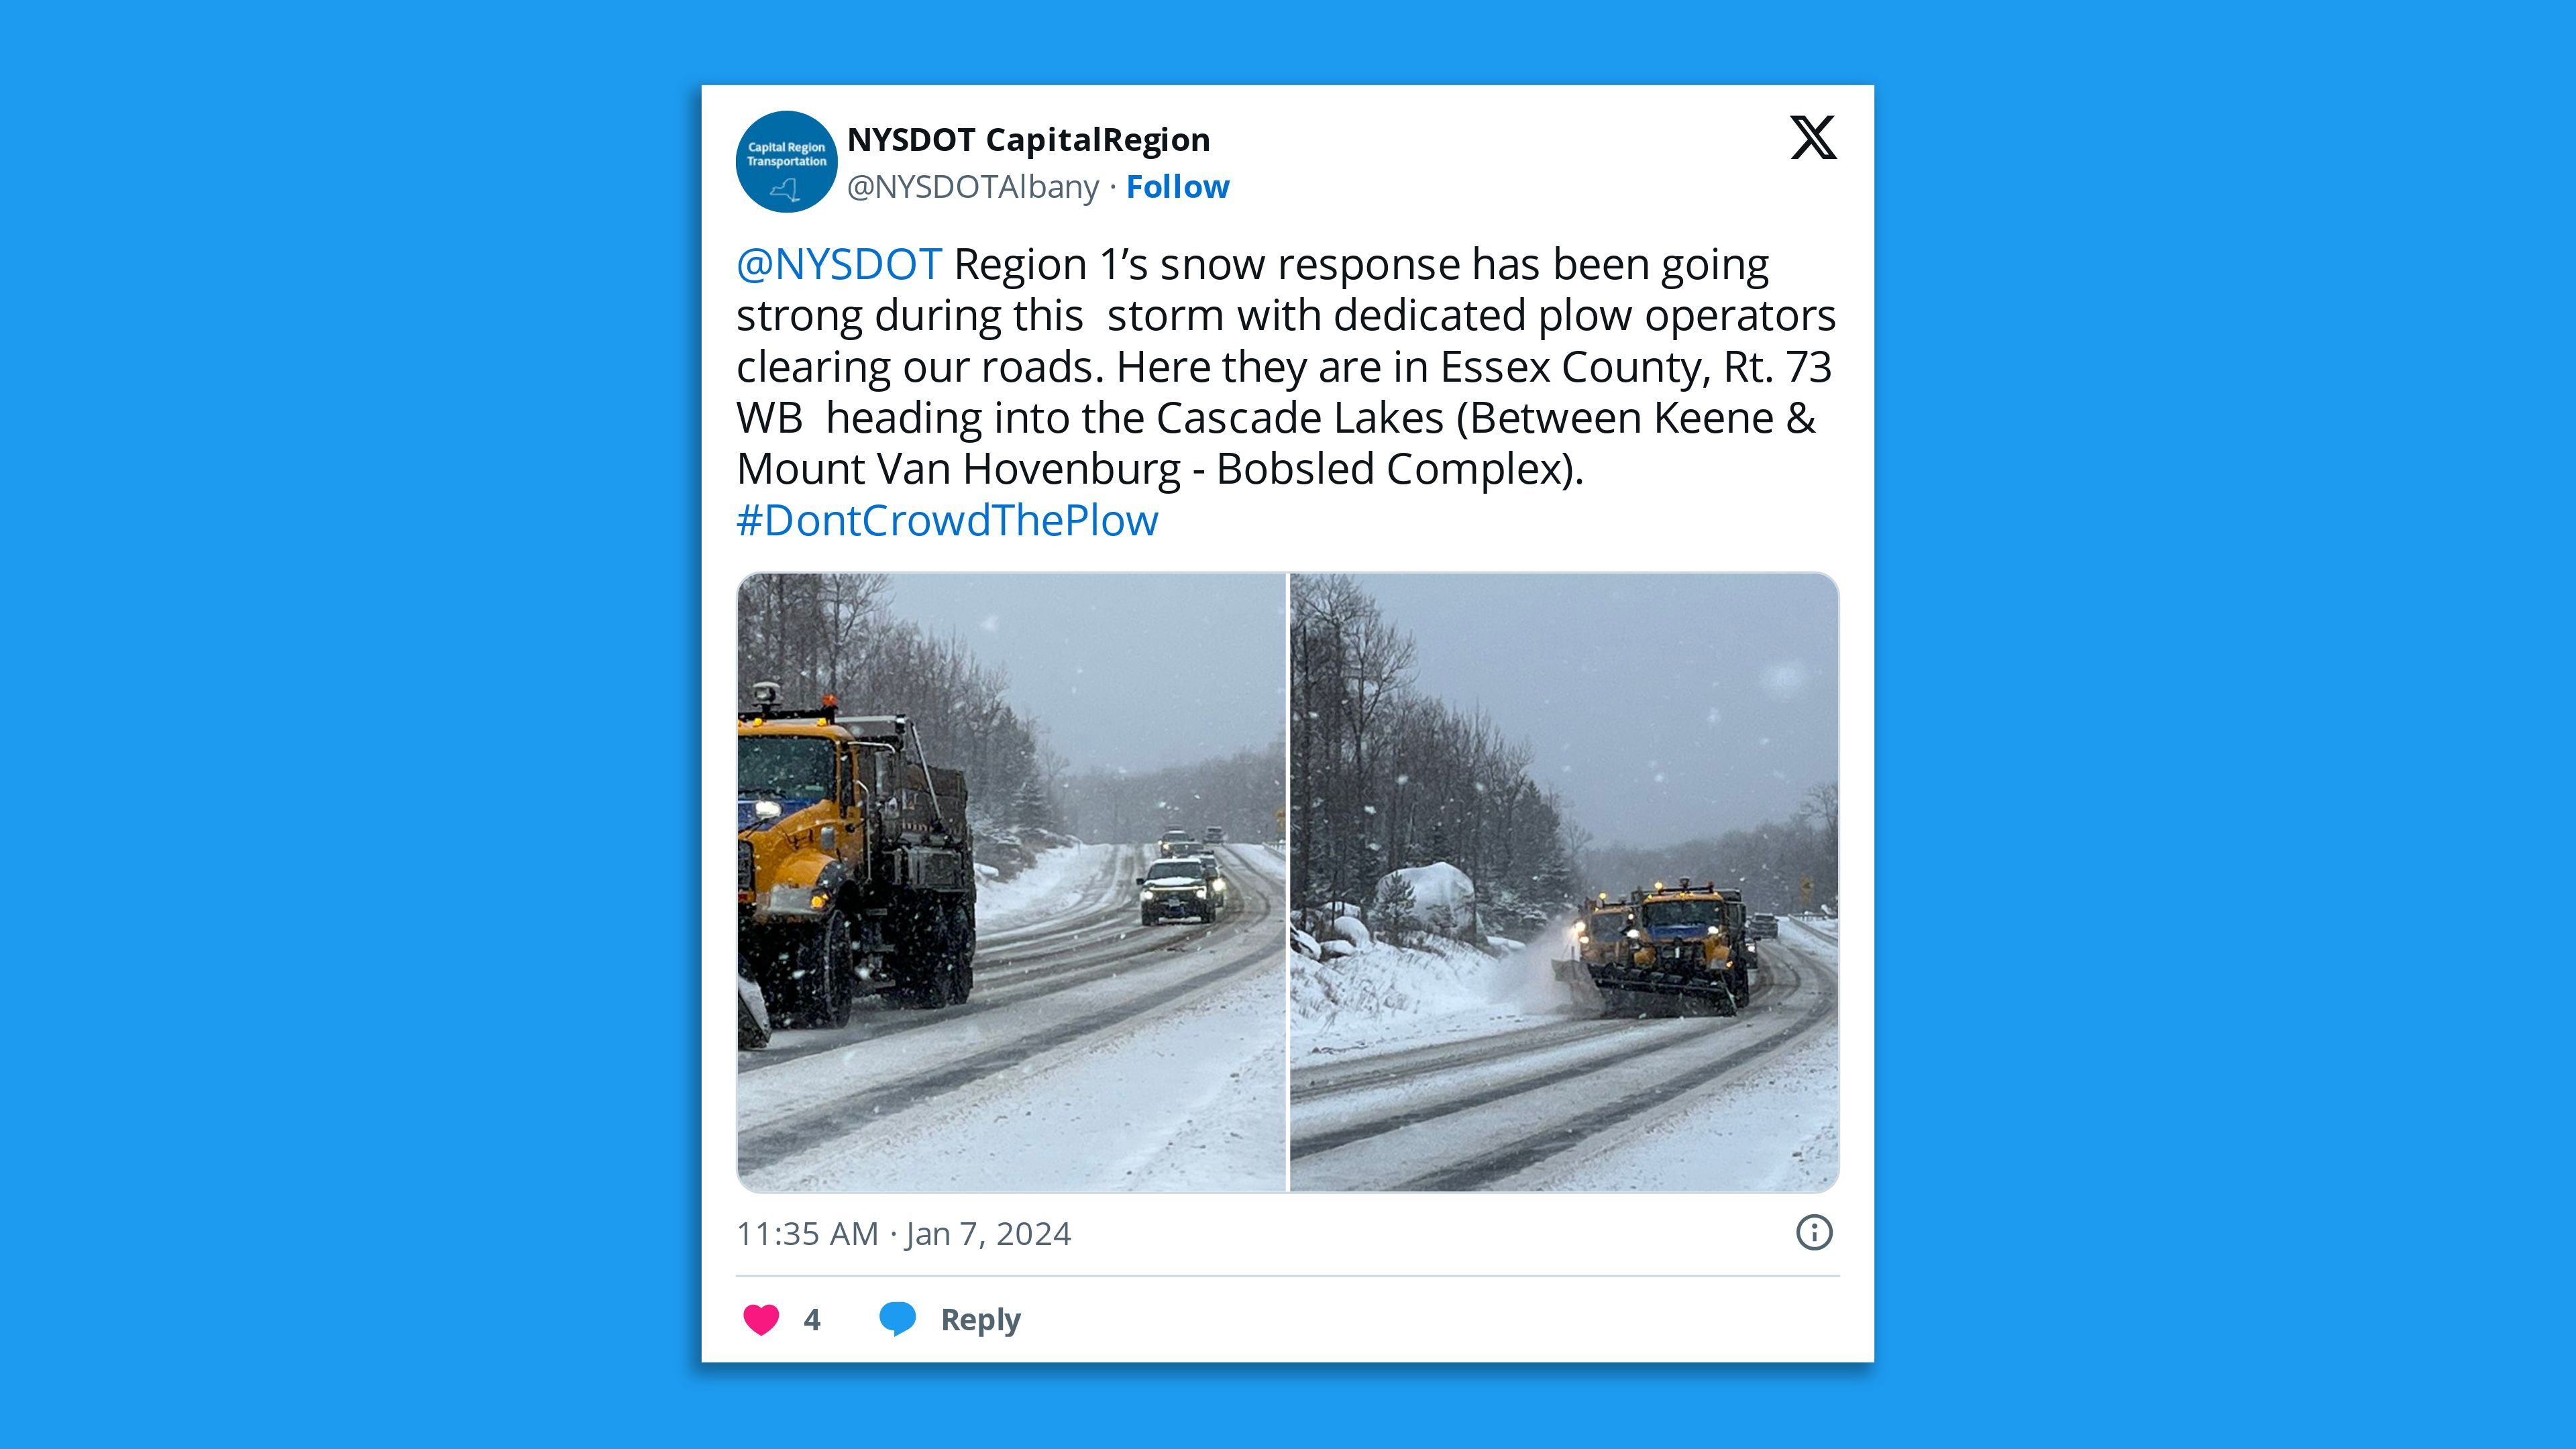 A screenshot of a tweet from NY DOT's Capital Region showing snow plows on roads with the comment: "@NYSDOT  Region 1’s snow response has been going strong during this  storm with dedicated plow operators clearing our roads. Here they are in Essex County, Rt. 73 WB  heading into the Cascade Lakes (Between Keene & Mount Van Hovenburg - Bobsled Complex). #DontCrowdThePlow"